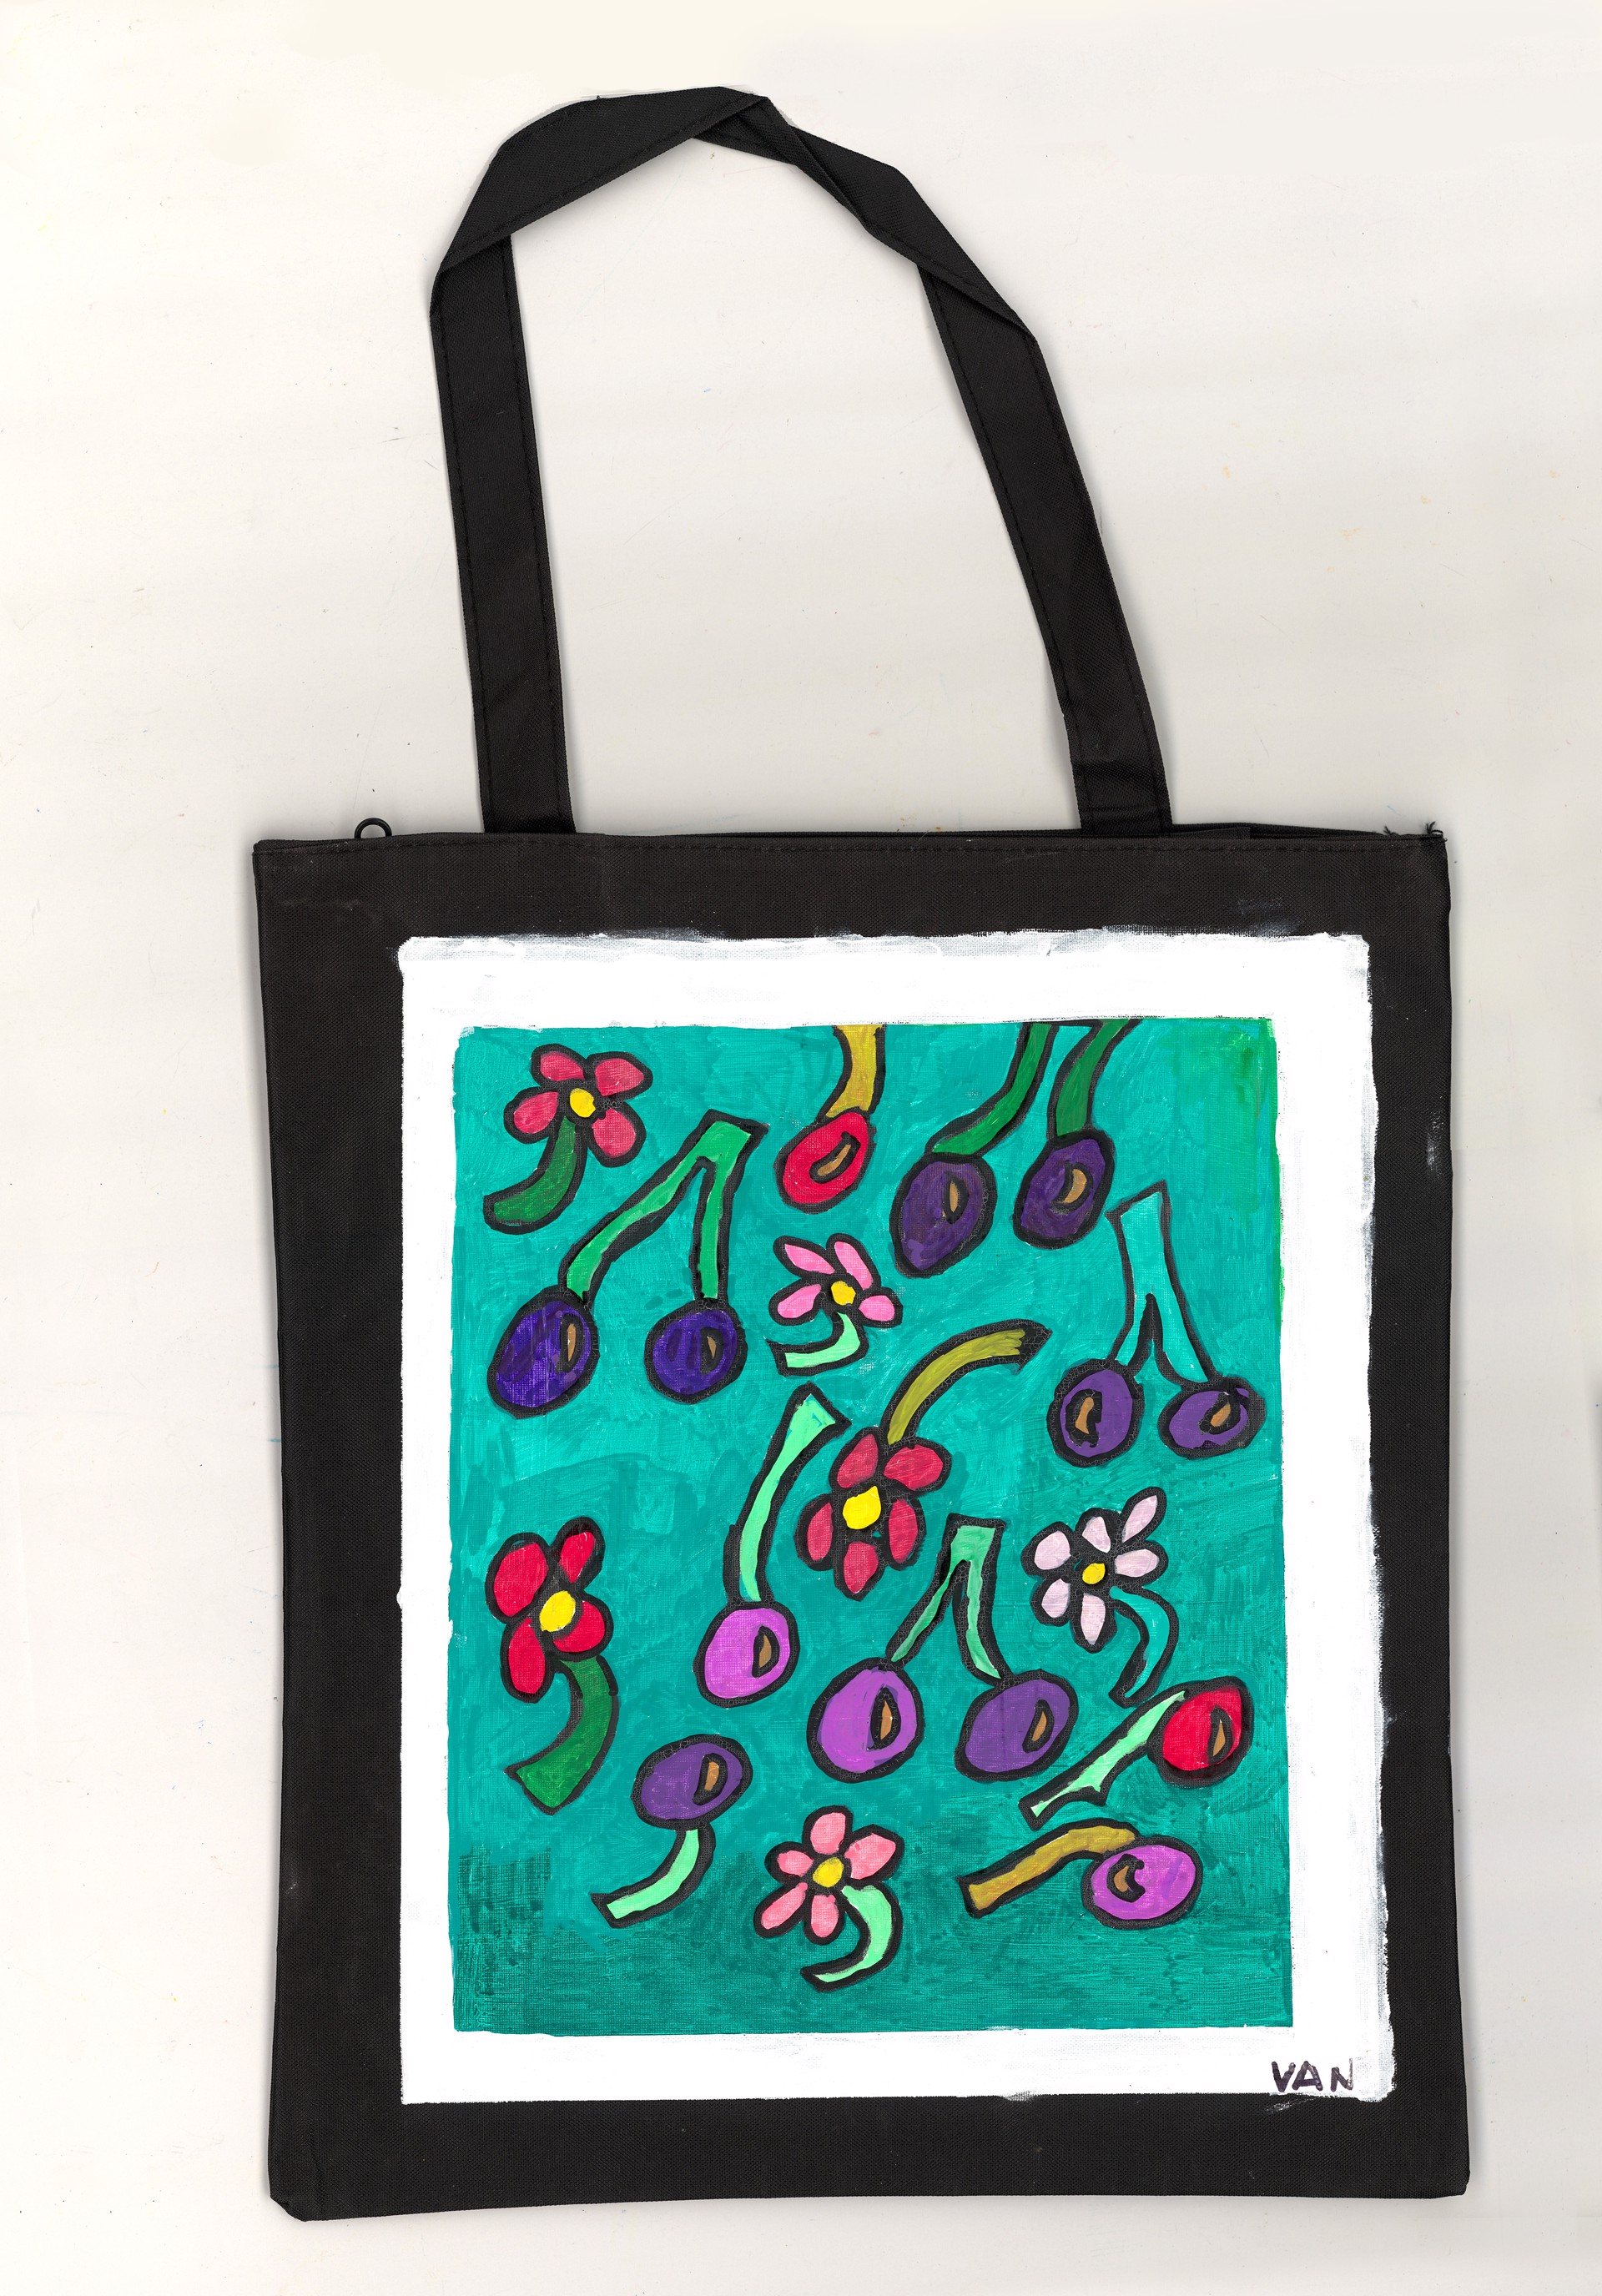 Beyond Fruit and Flowers (tote bag) by Vanessa Monroe